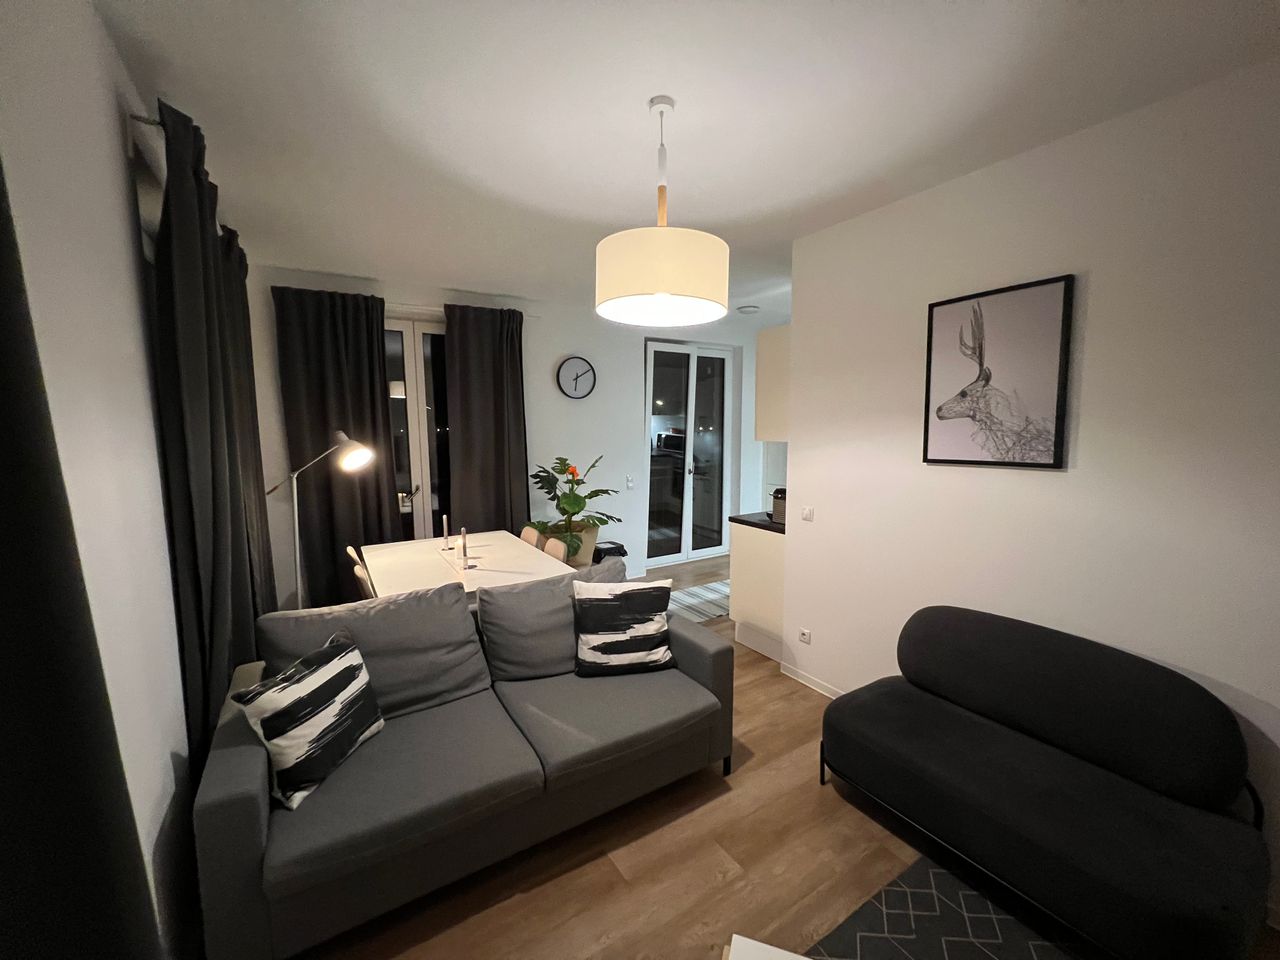 Fashionable and new apartment with nice balcony in calm area of Berlin Neukölln